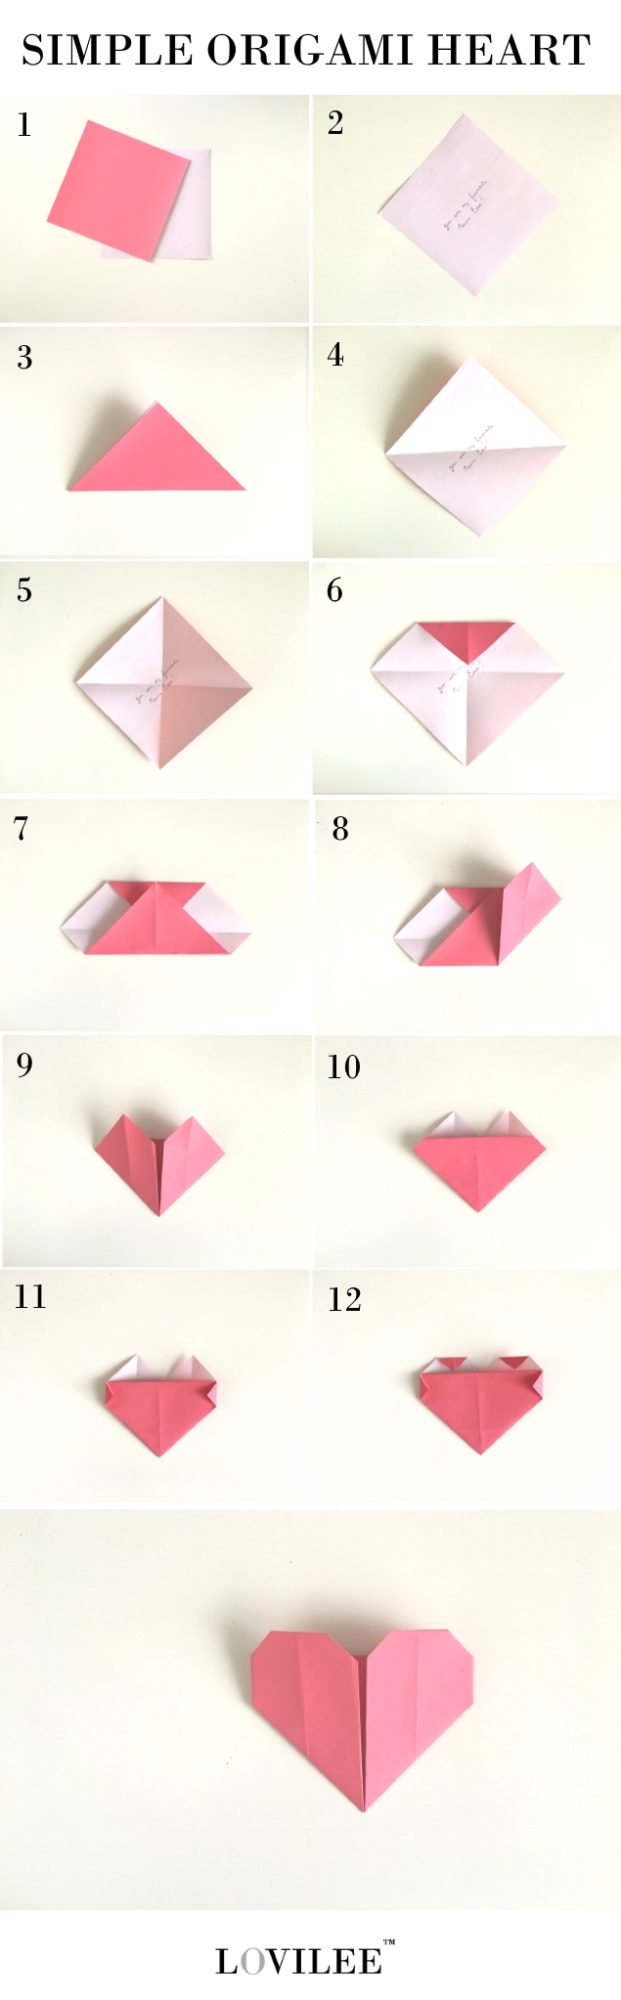 Simple Origami Instructions Simple Origami Heart Step Step Instructions Lovilee Blog